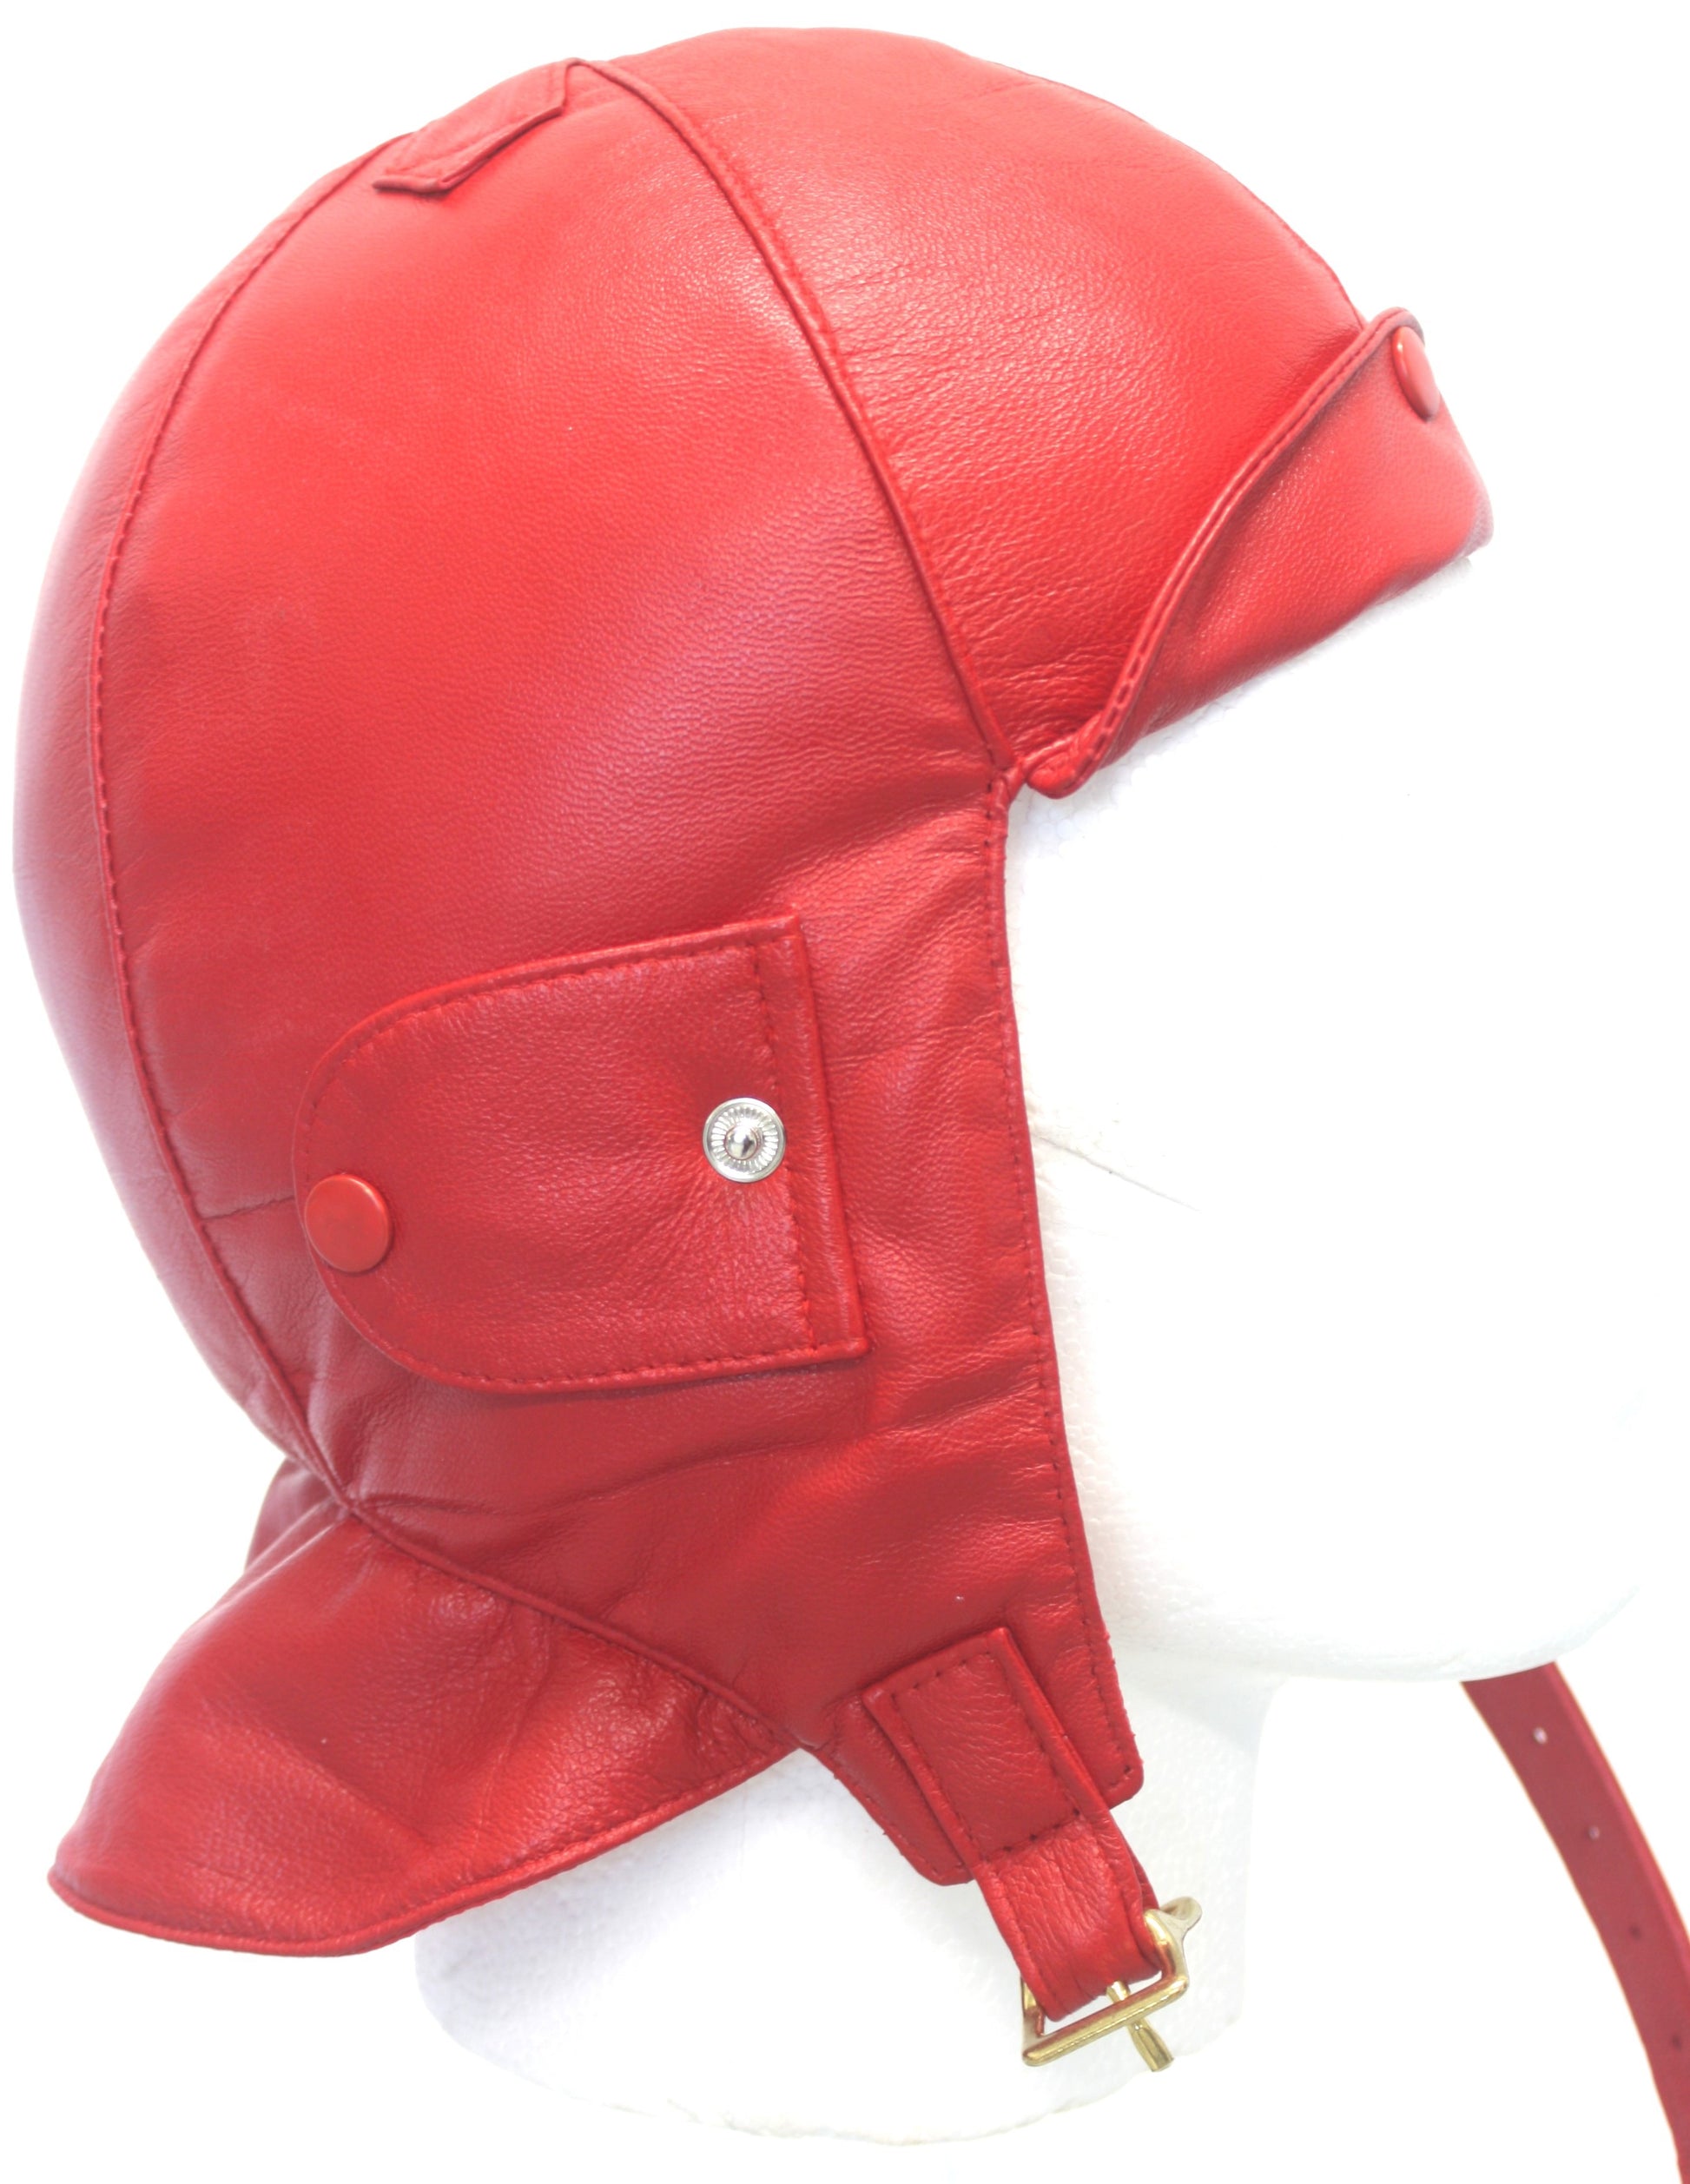 Red leather driving helmet